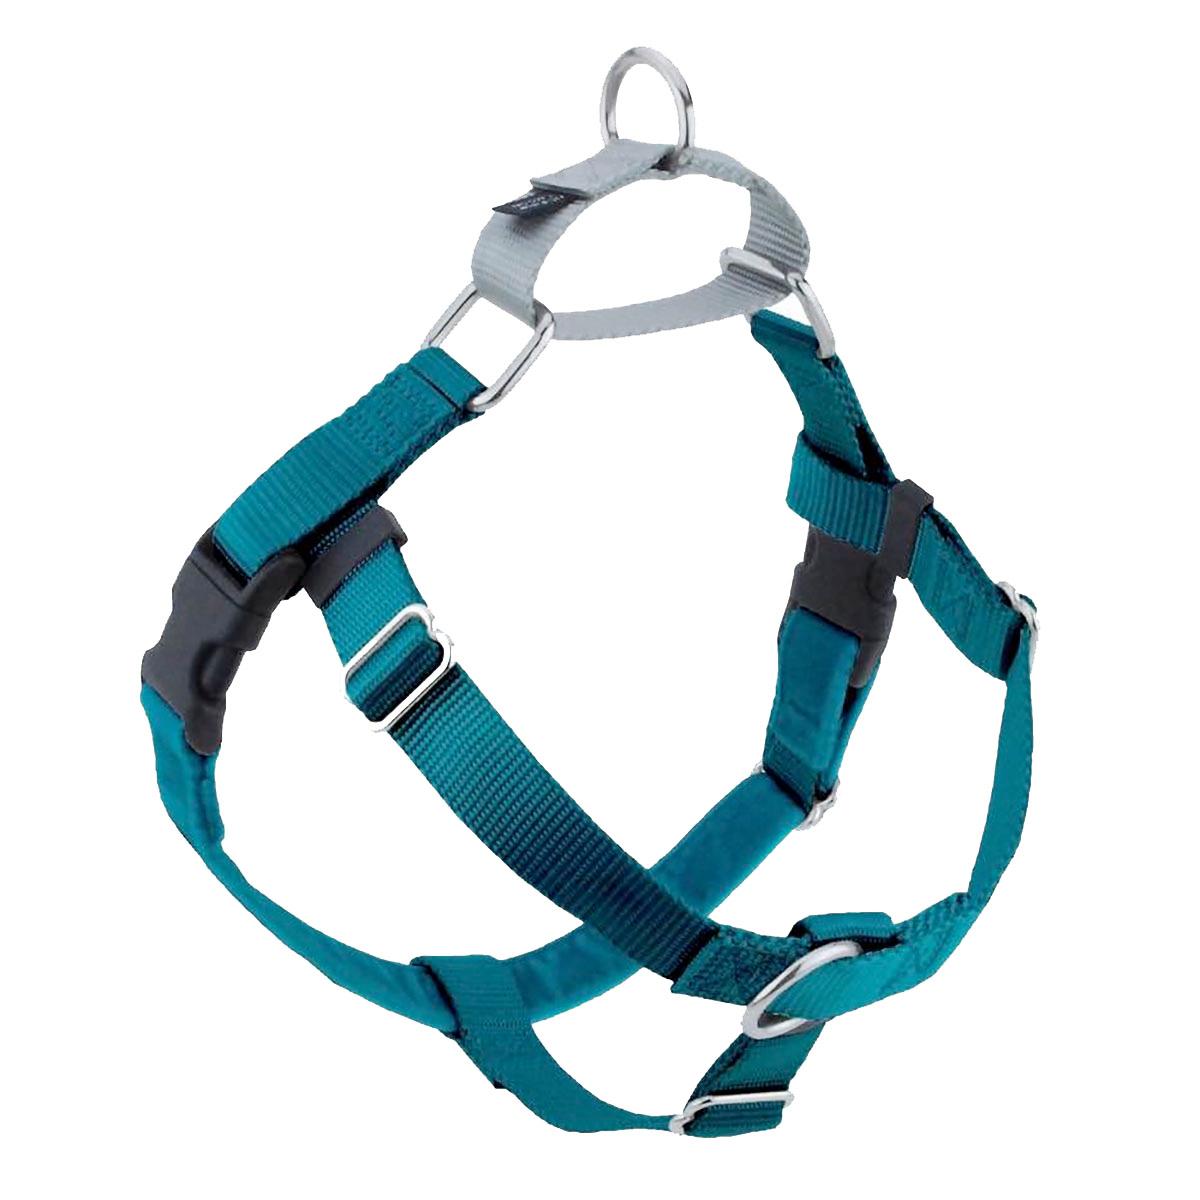 2 Hounds Design Freedom No-Pull Dog Harness - Teal